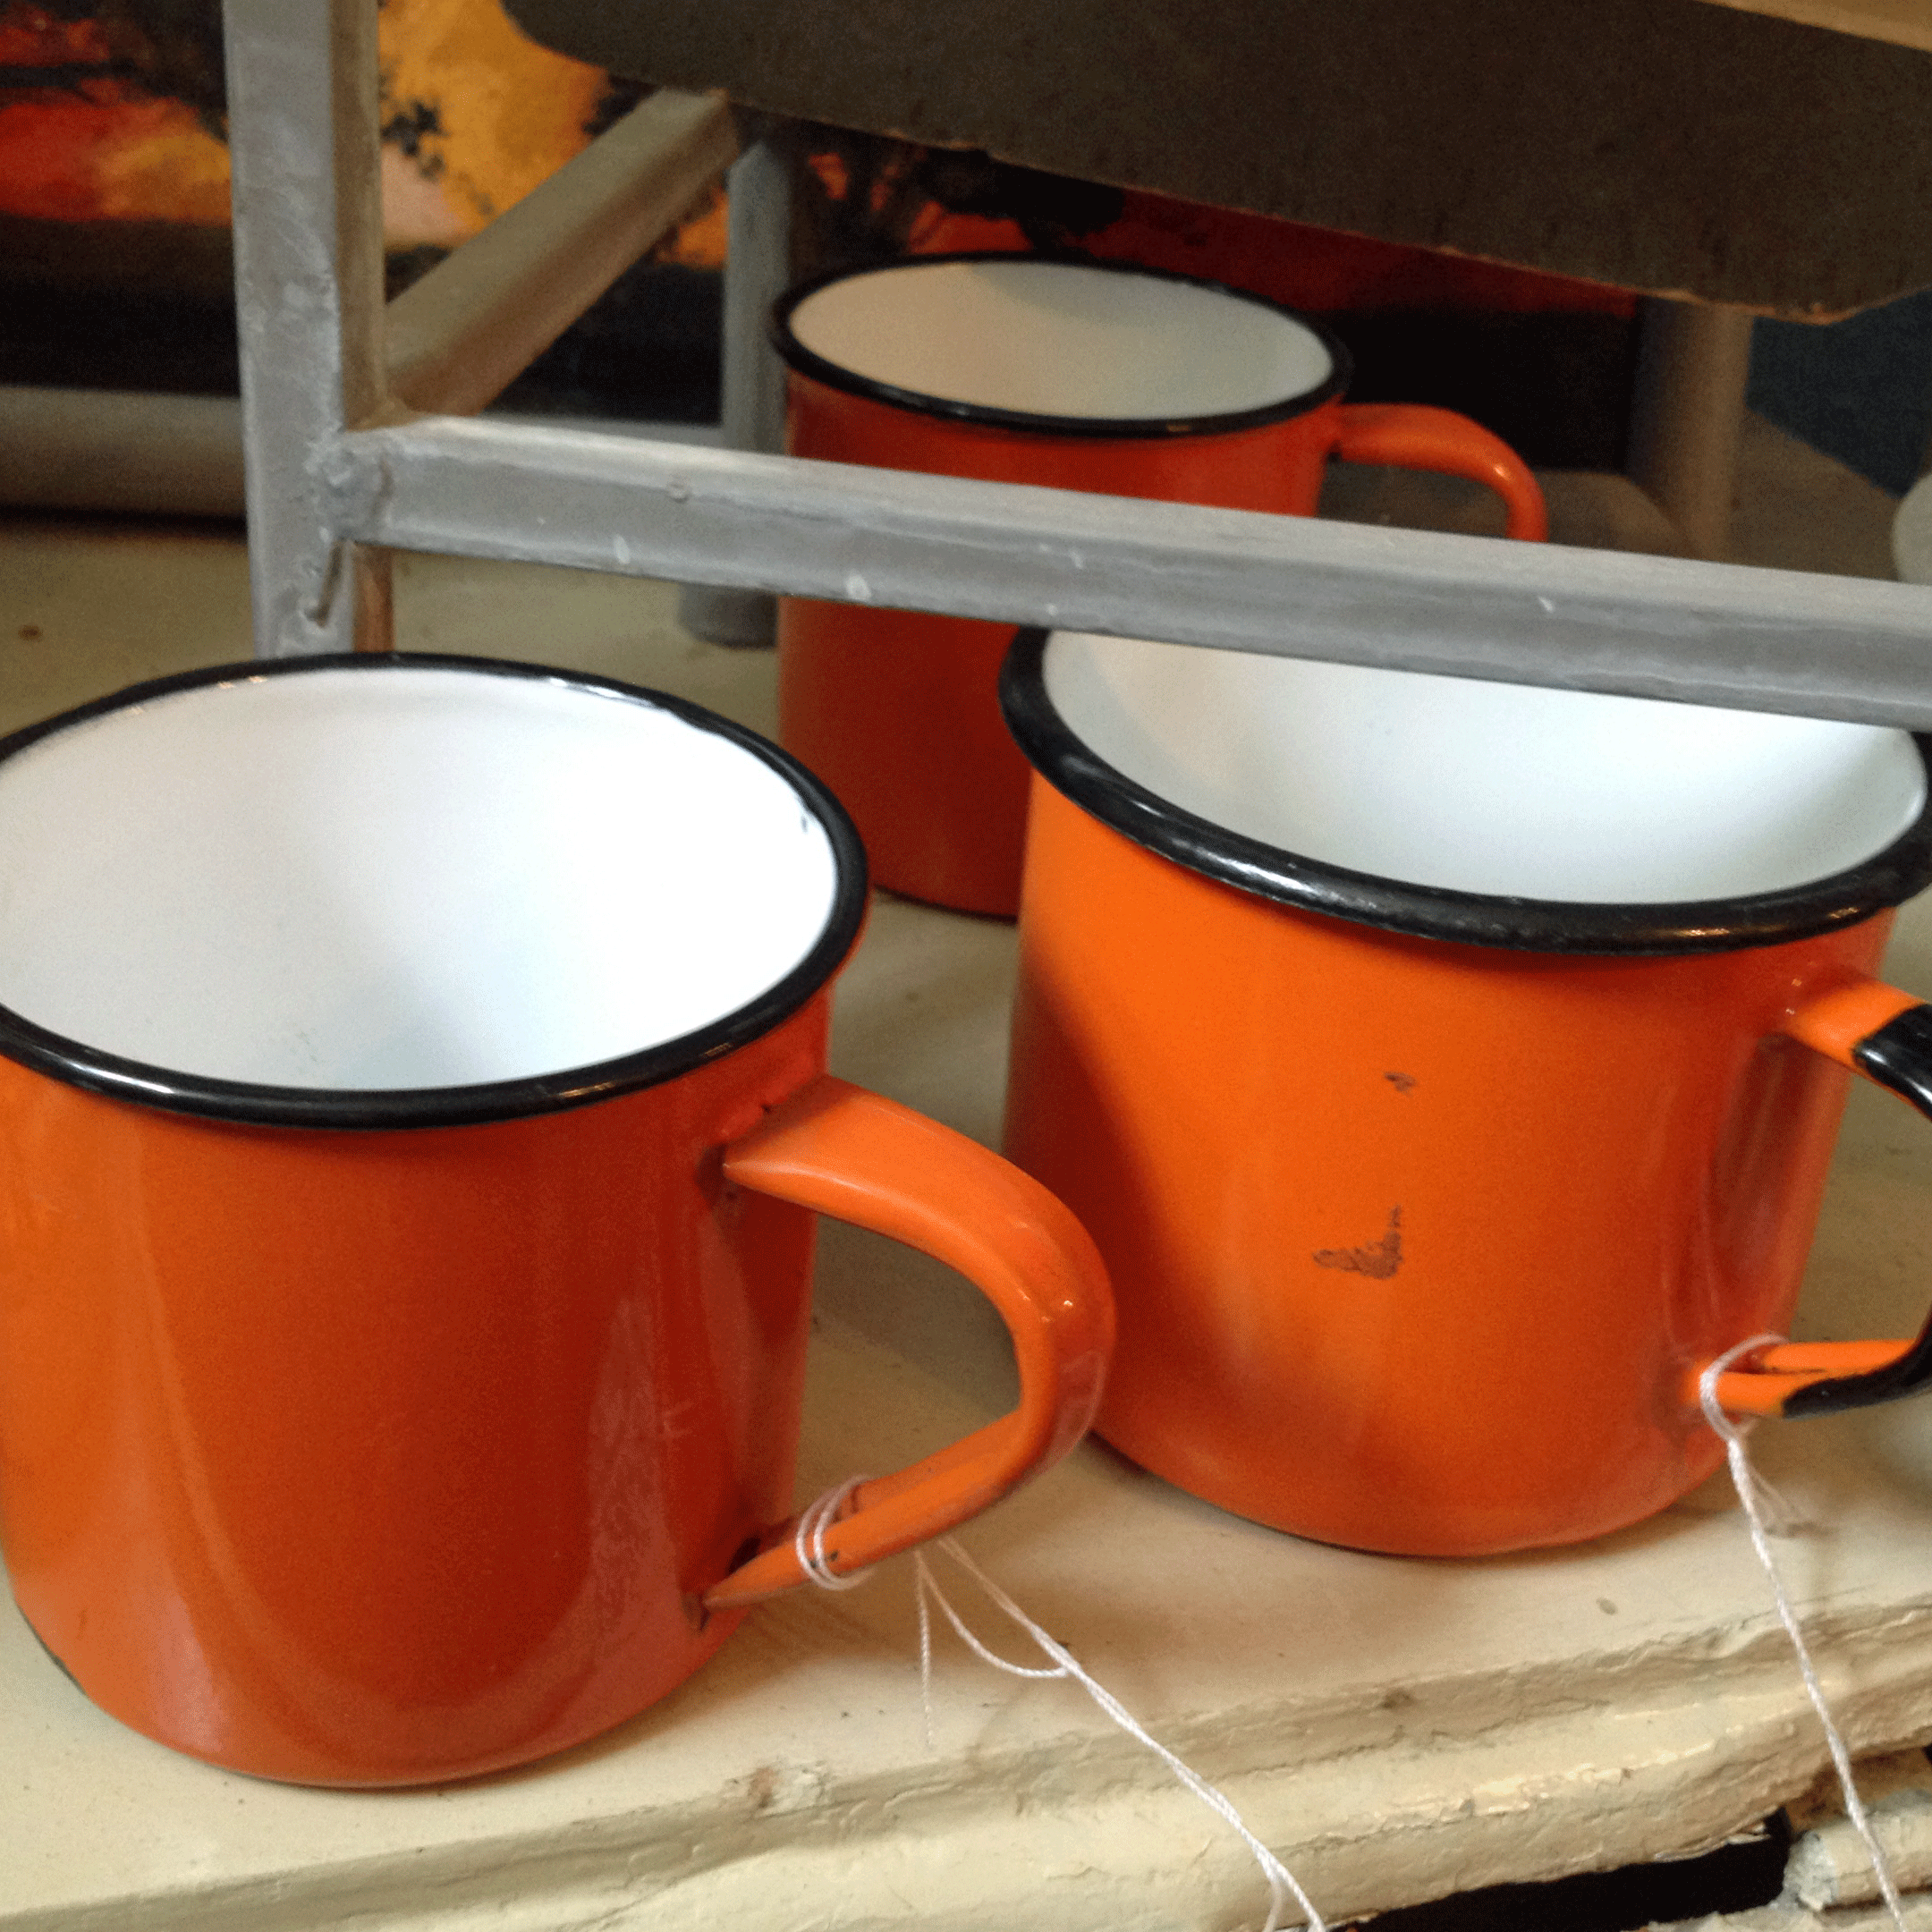 When you venture outside, steaming coffee will be waiting for you by the campfire in one of these metal mugs.